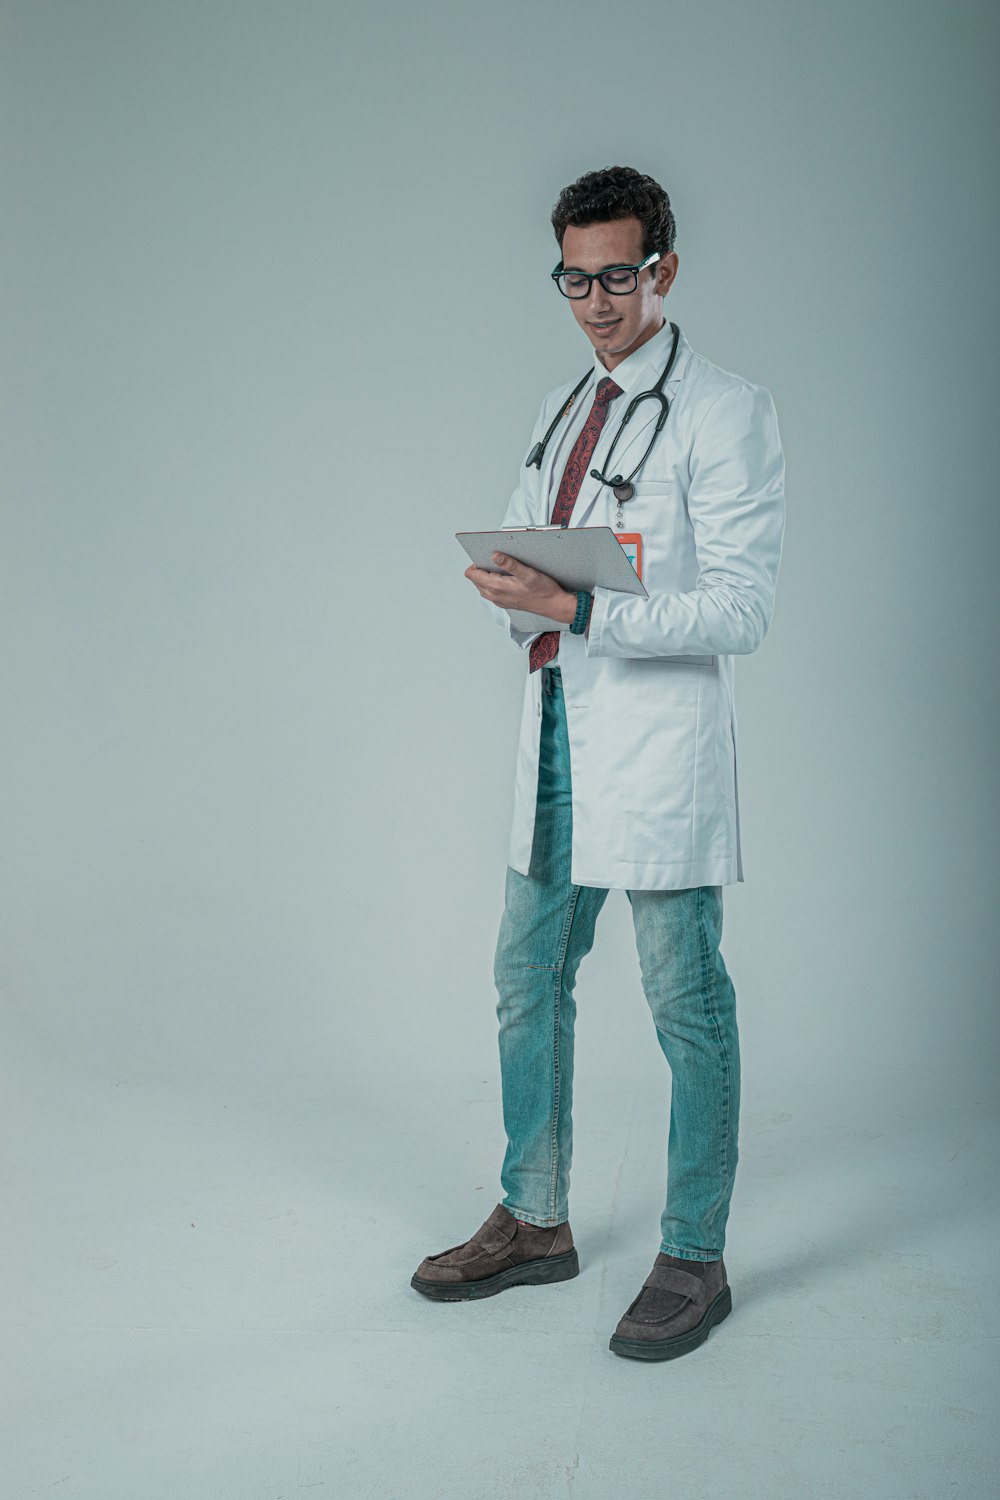 a male doctor in a white coat and tie